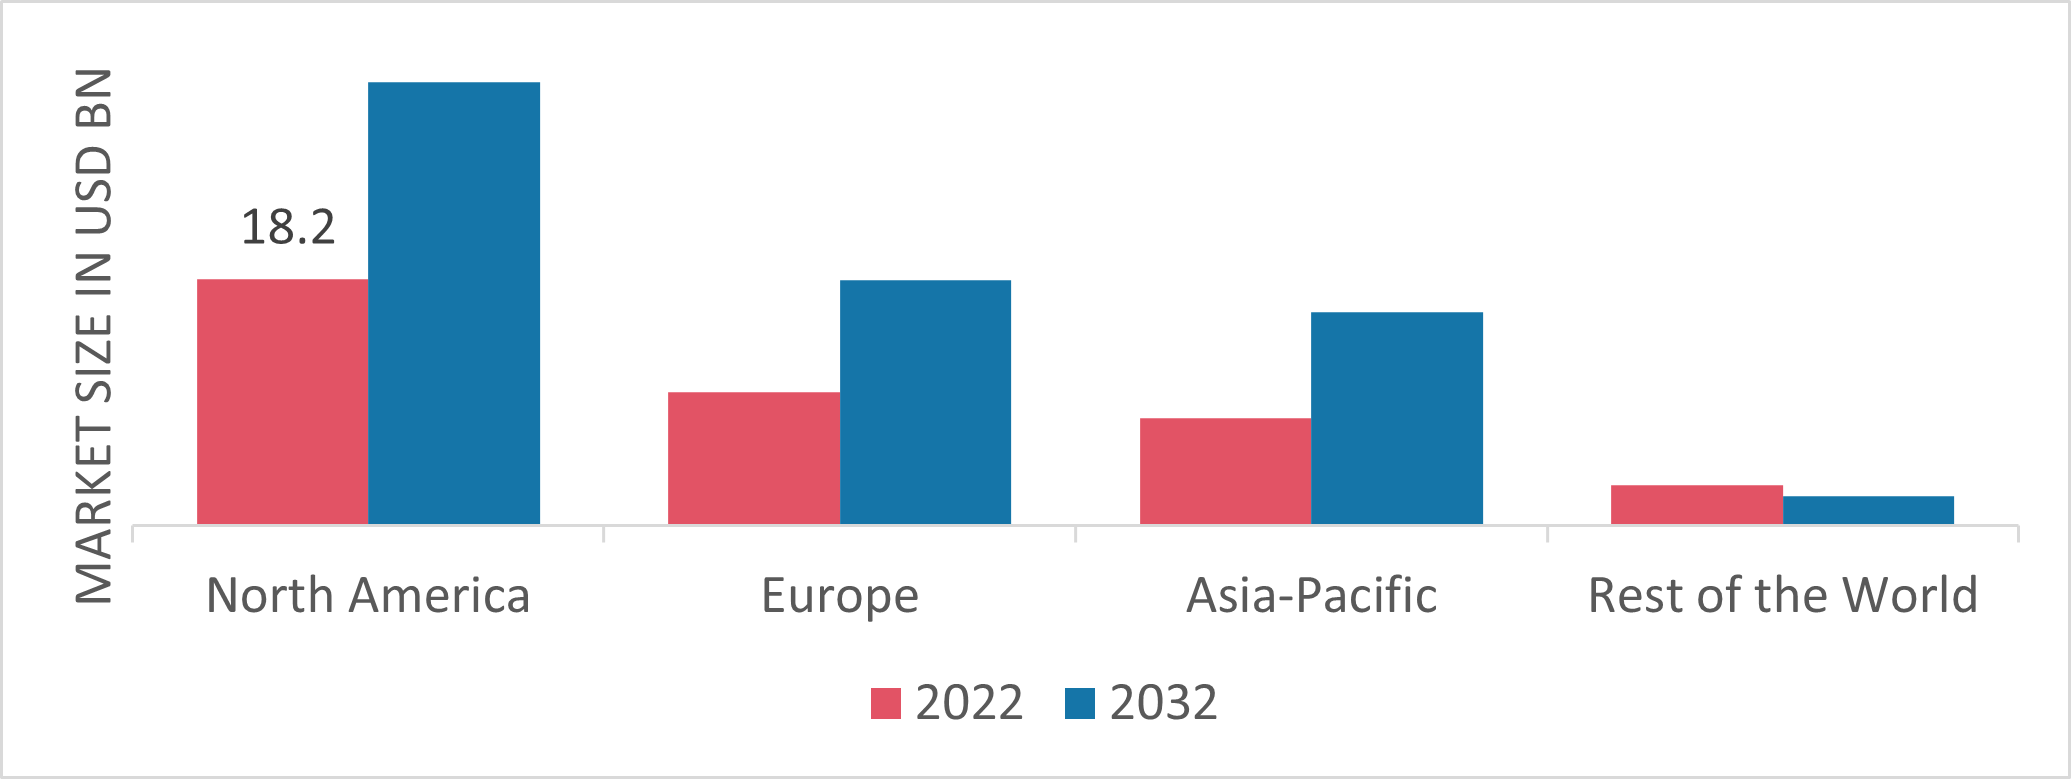 Enhanced Oil Recovery Market Share By Region 2022